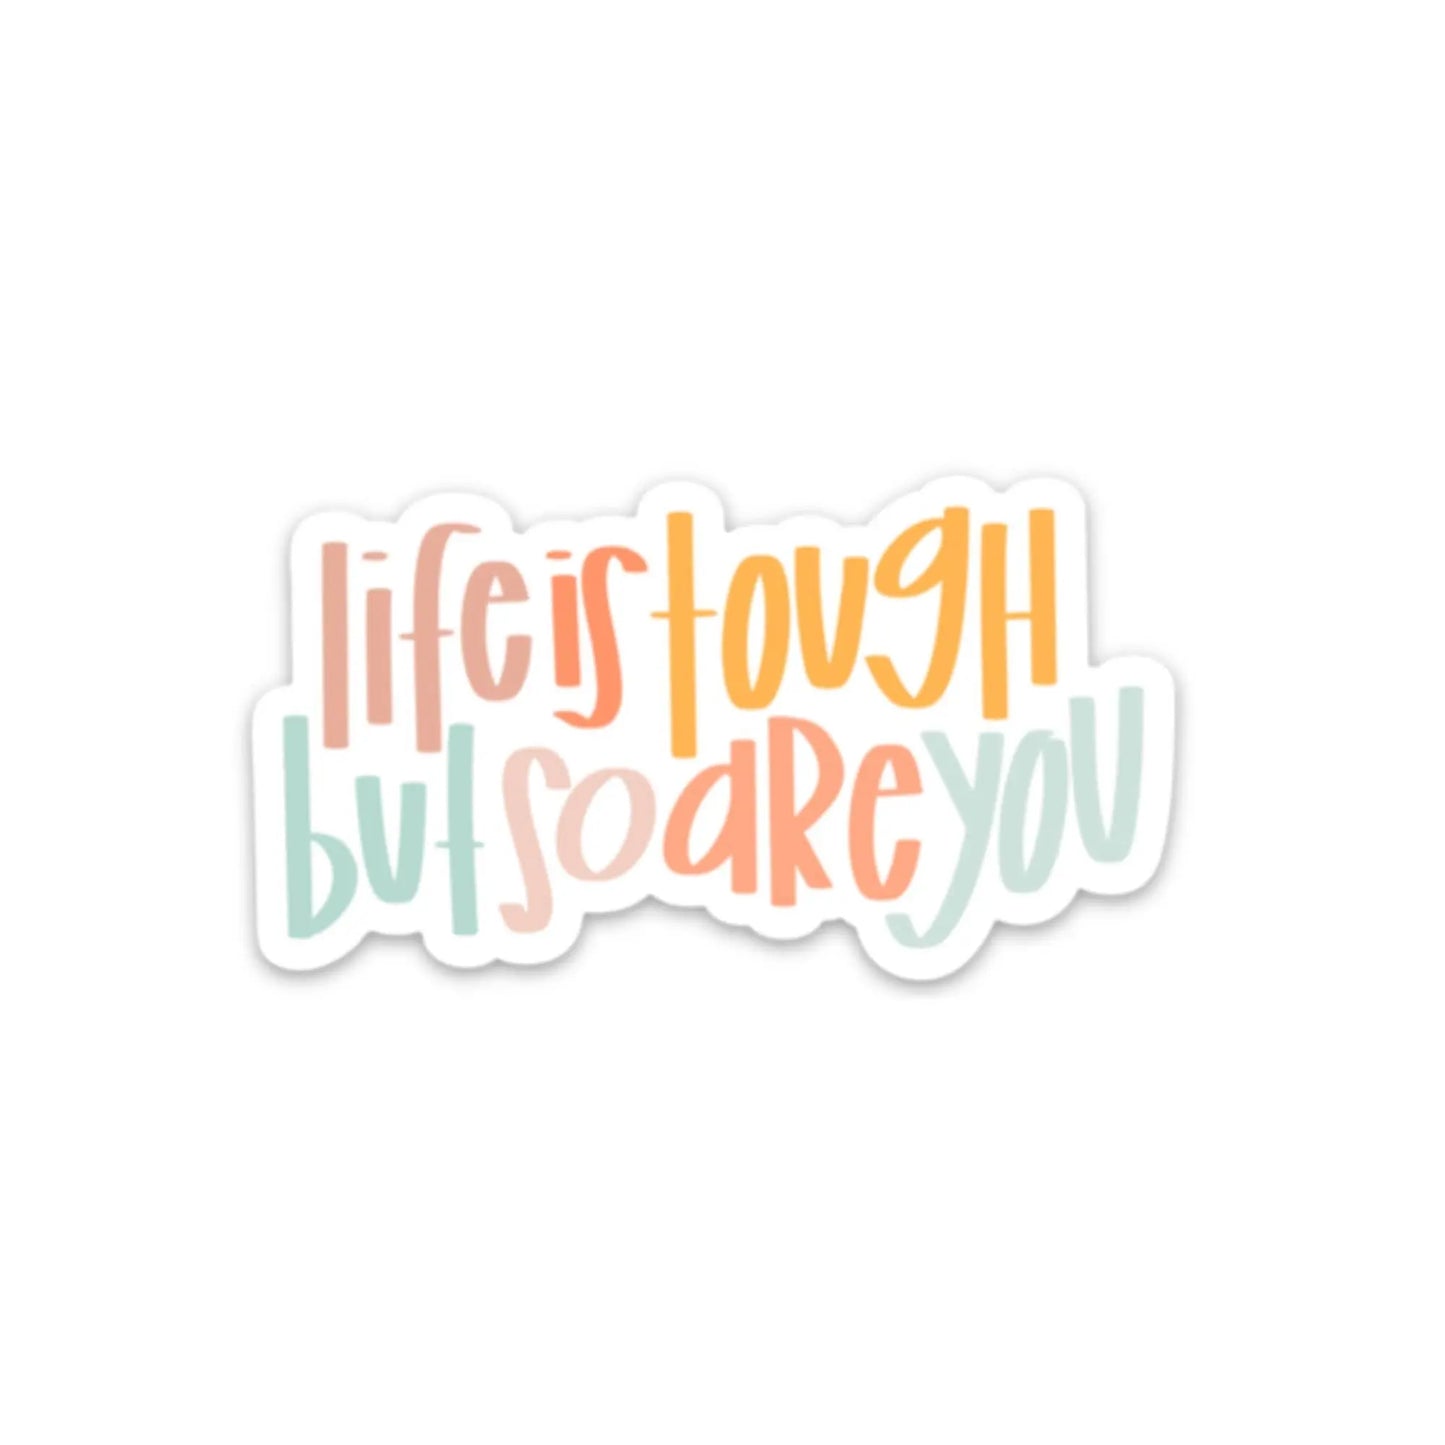 Magnet | Life is tough but so are you | Refrigerator magnets swaygirls